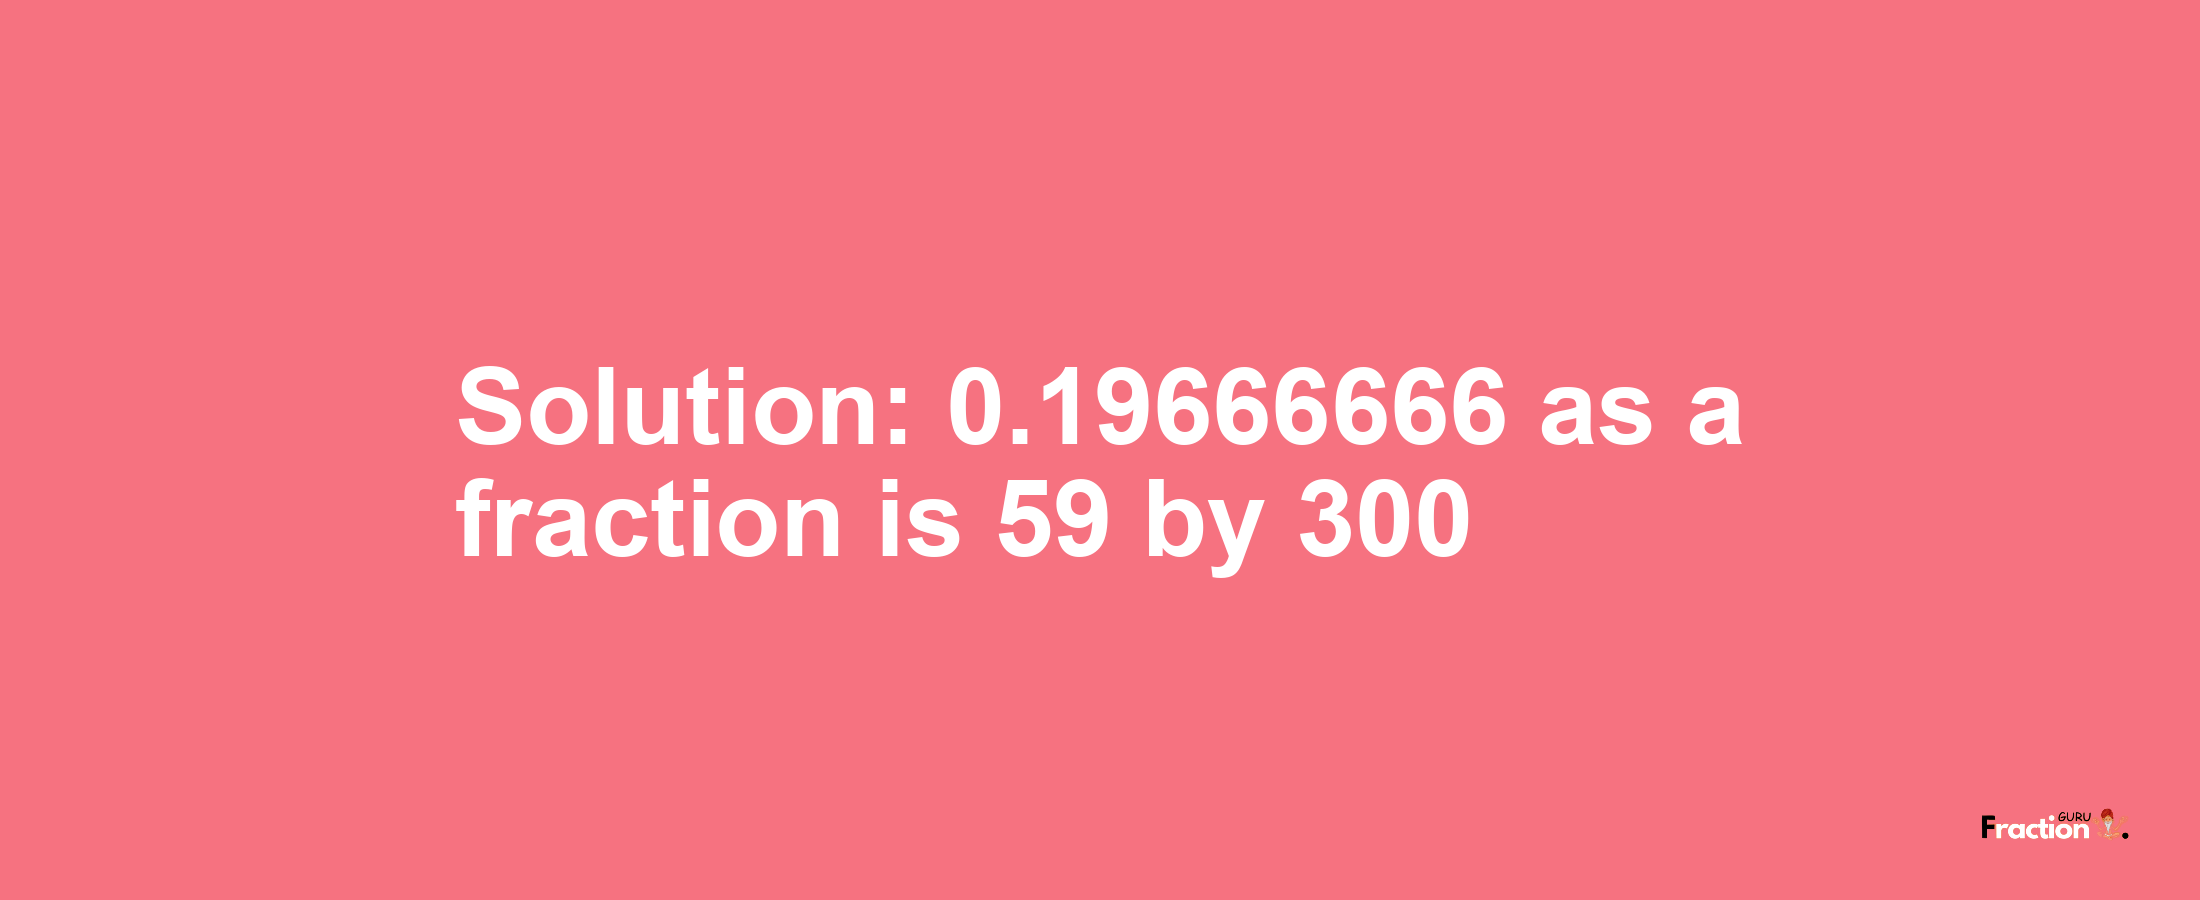 Solution:0.19666666 as a fraction is 59/300